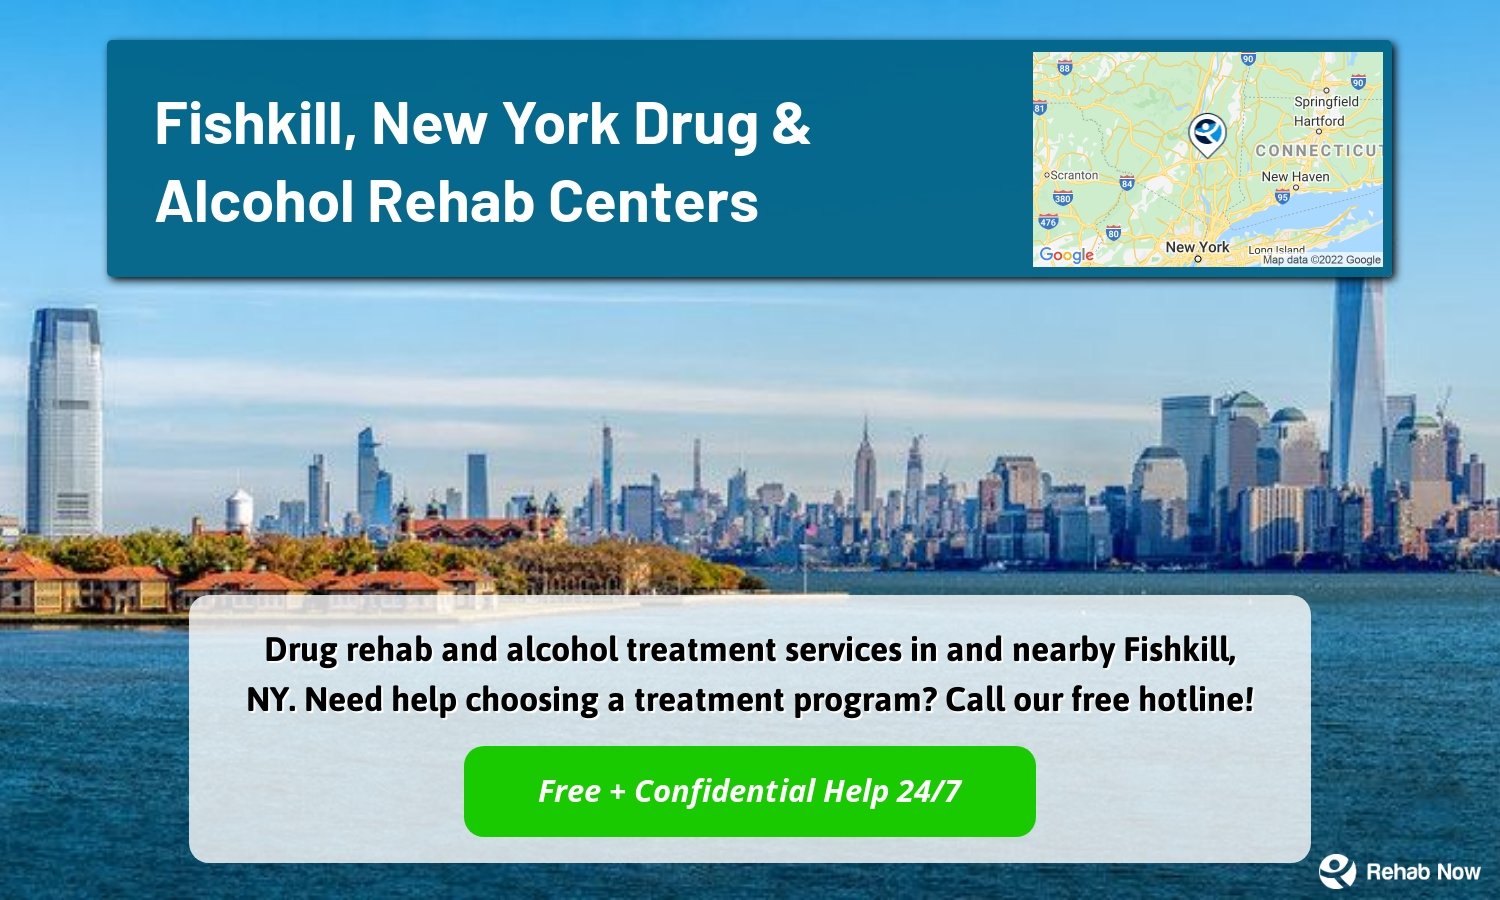 Drug rehab and alcohol treatment services in and nearby Fishkill, NY. Need help choosing a treatment program? Call our free hotline!